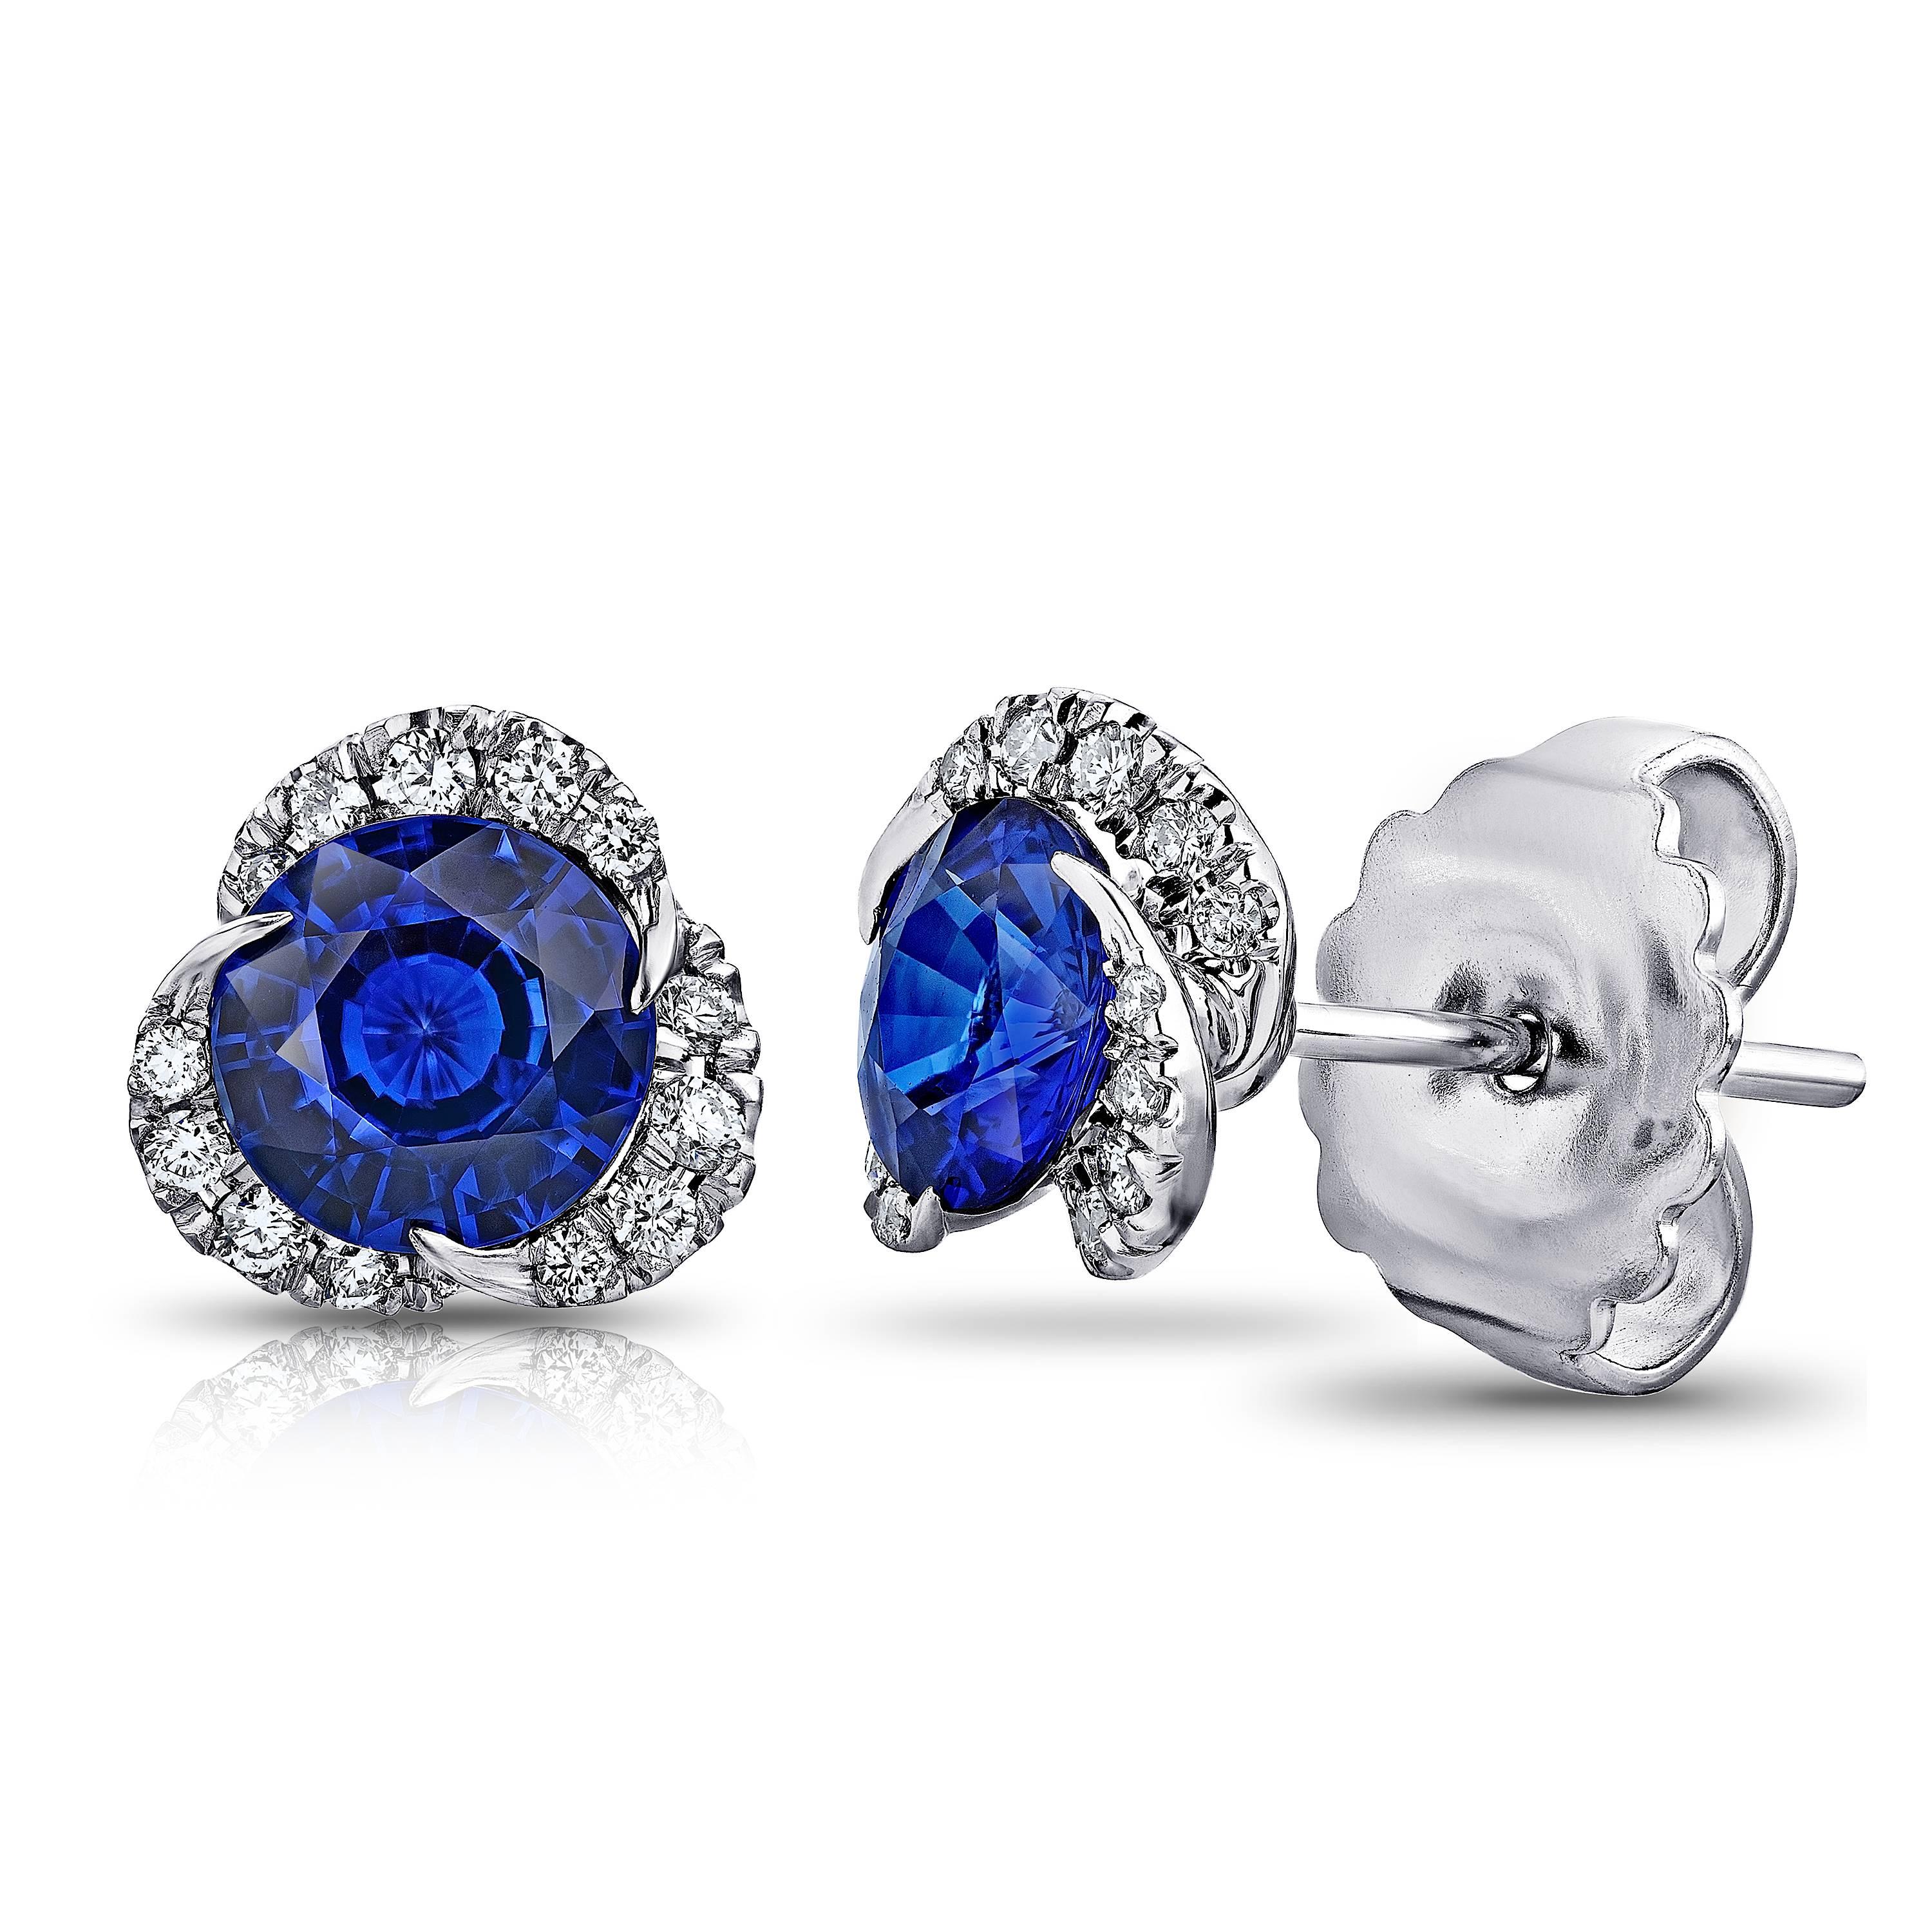 Two round blue sapphires weighing 1.97 carats set with 30 round diamonds weighing .24 carats (F+ VVS/VS+). Set in hand made platinum. Only the finest quality stones and workmanship was used to create this impeccable  pair of earrings. The tops of